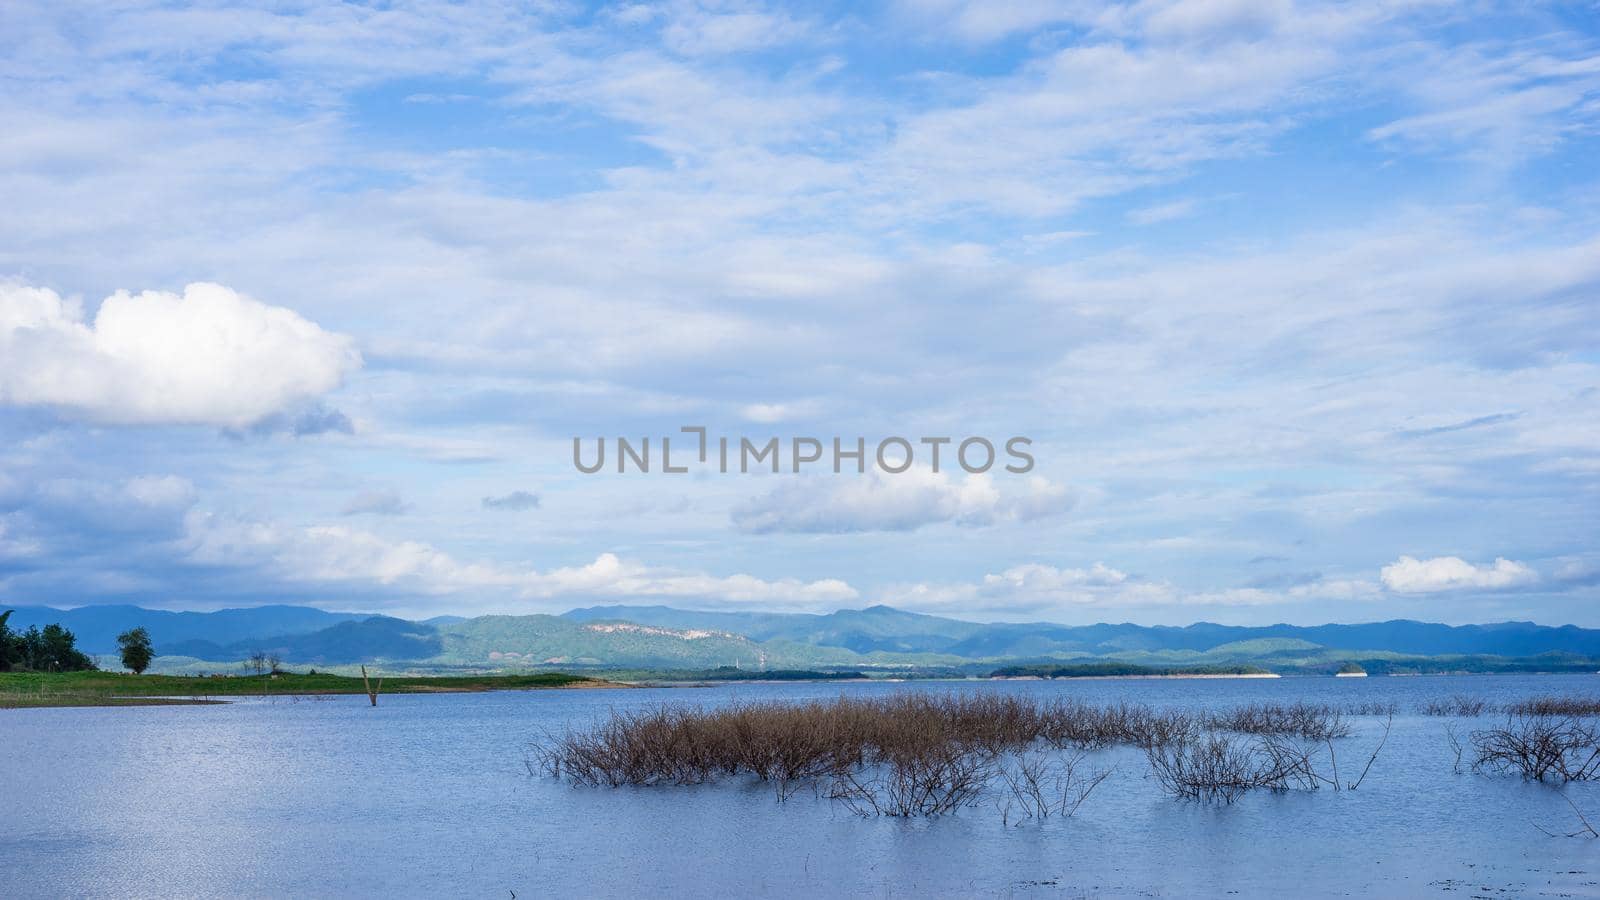 Lake mountains and cloudy sky in Khuean Srinagarindra National Park, Thailand by domonite